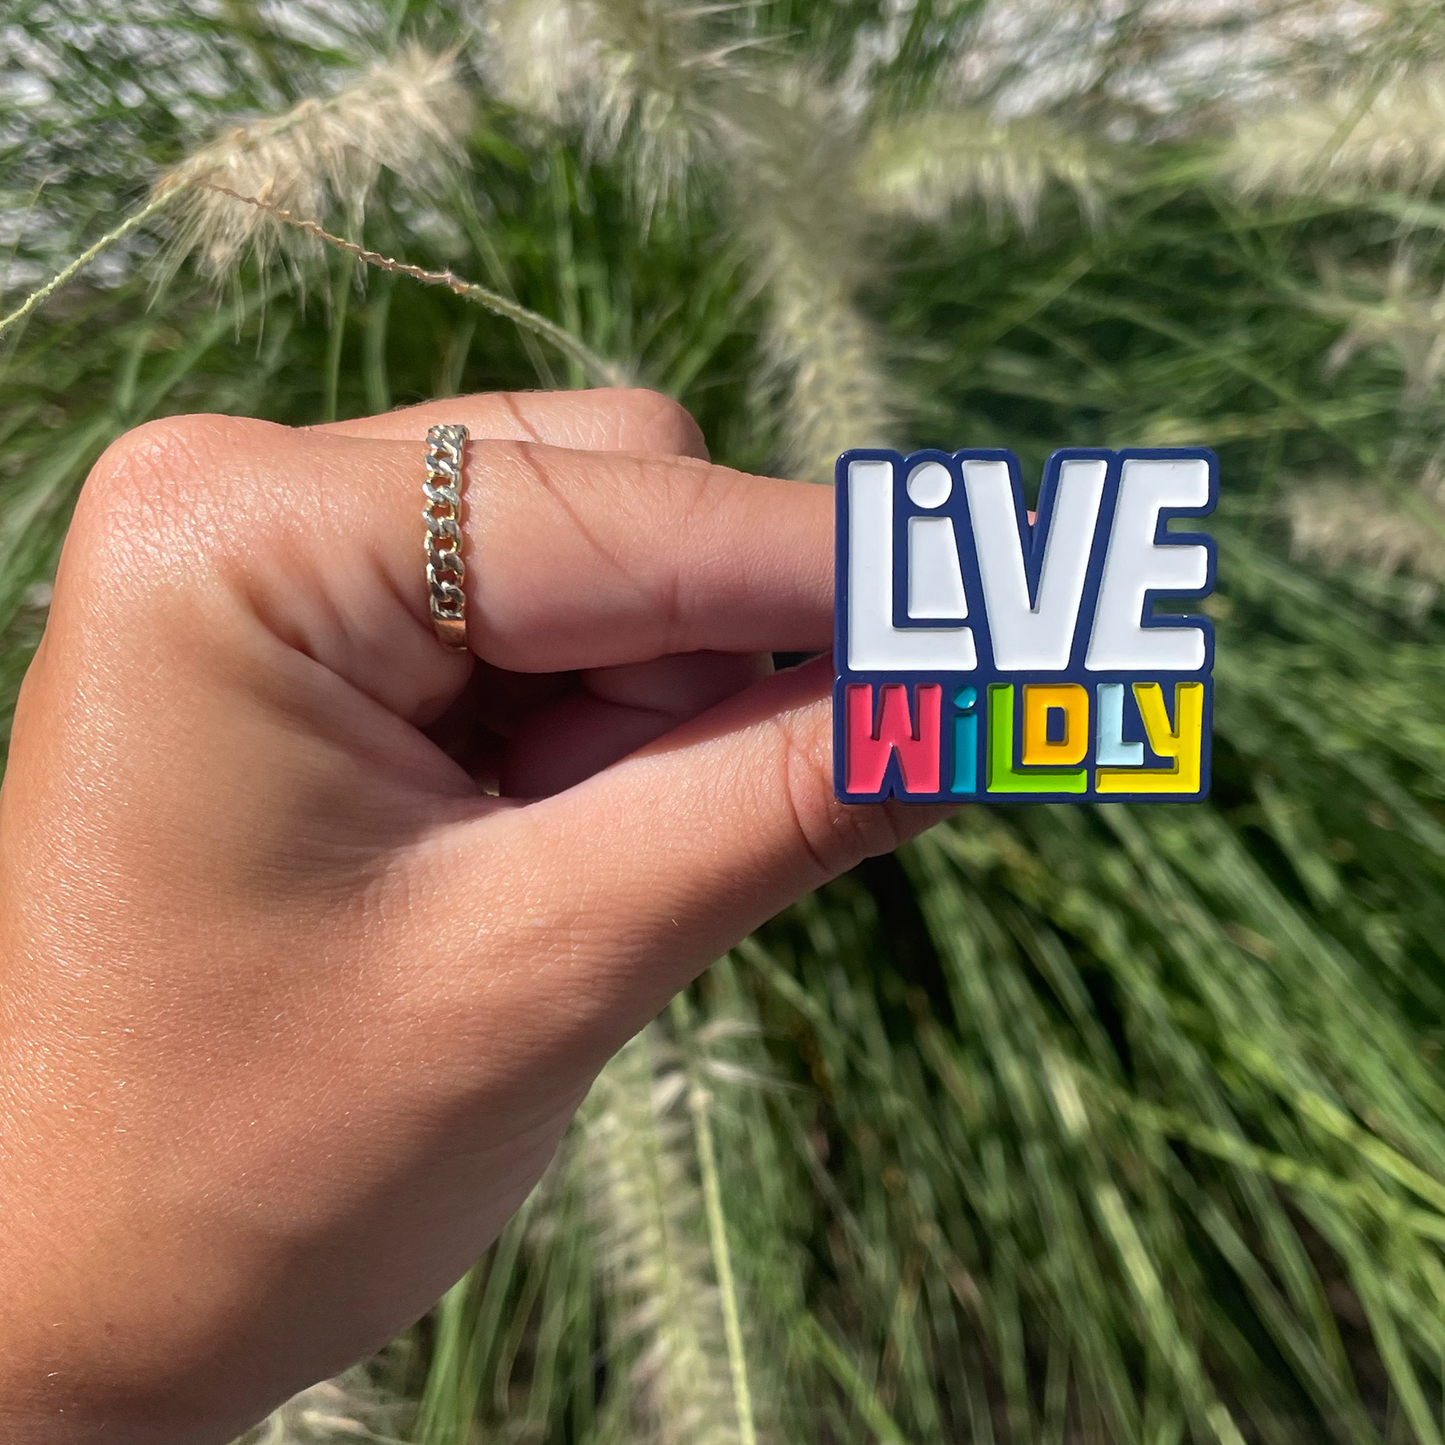 Live Wildly Enamel Pin - Held by hand - Live Wildly 